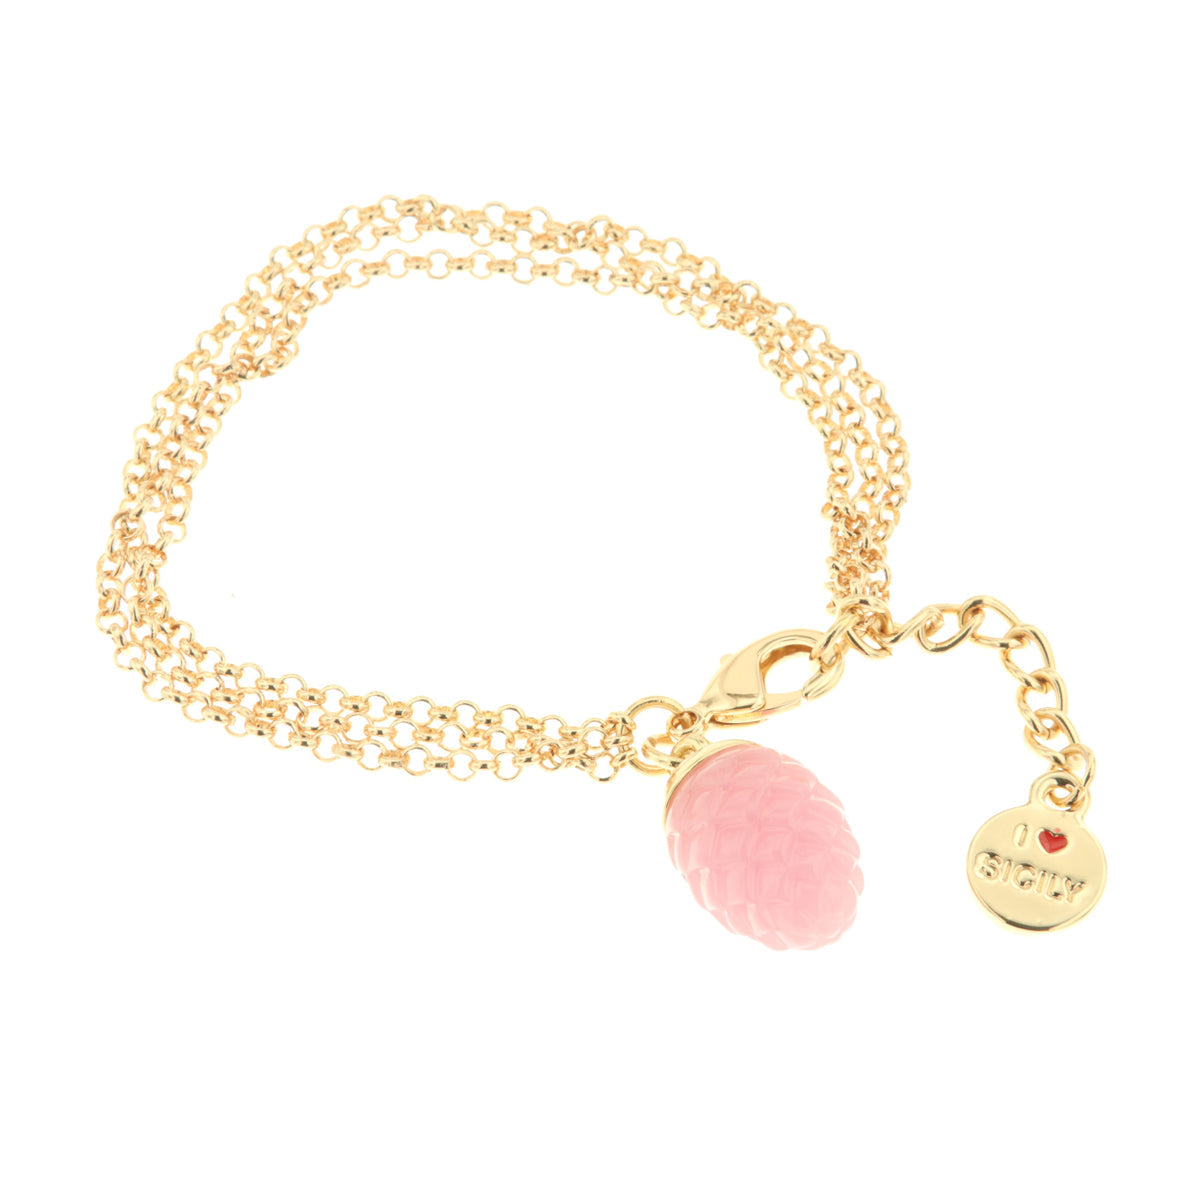 Metal bracelet with pink charming pine -shaped pendant